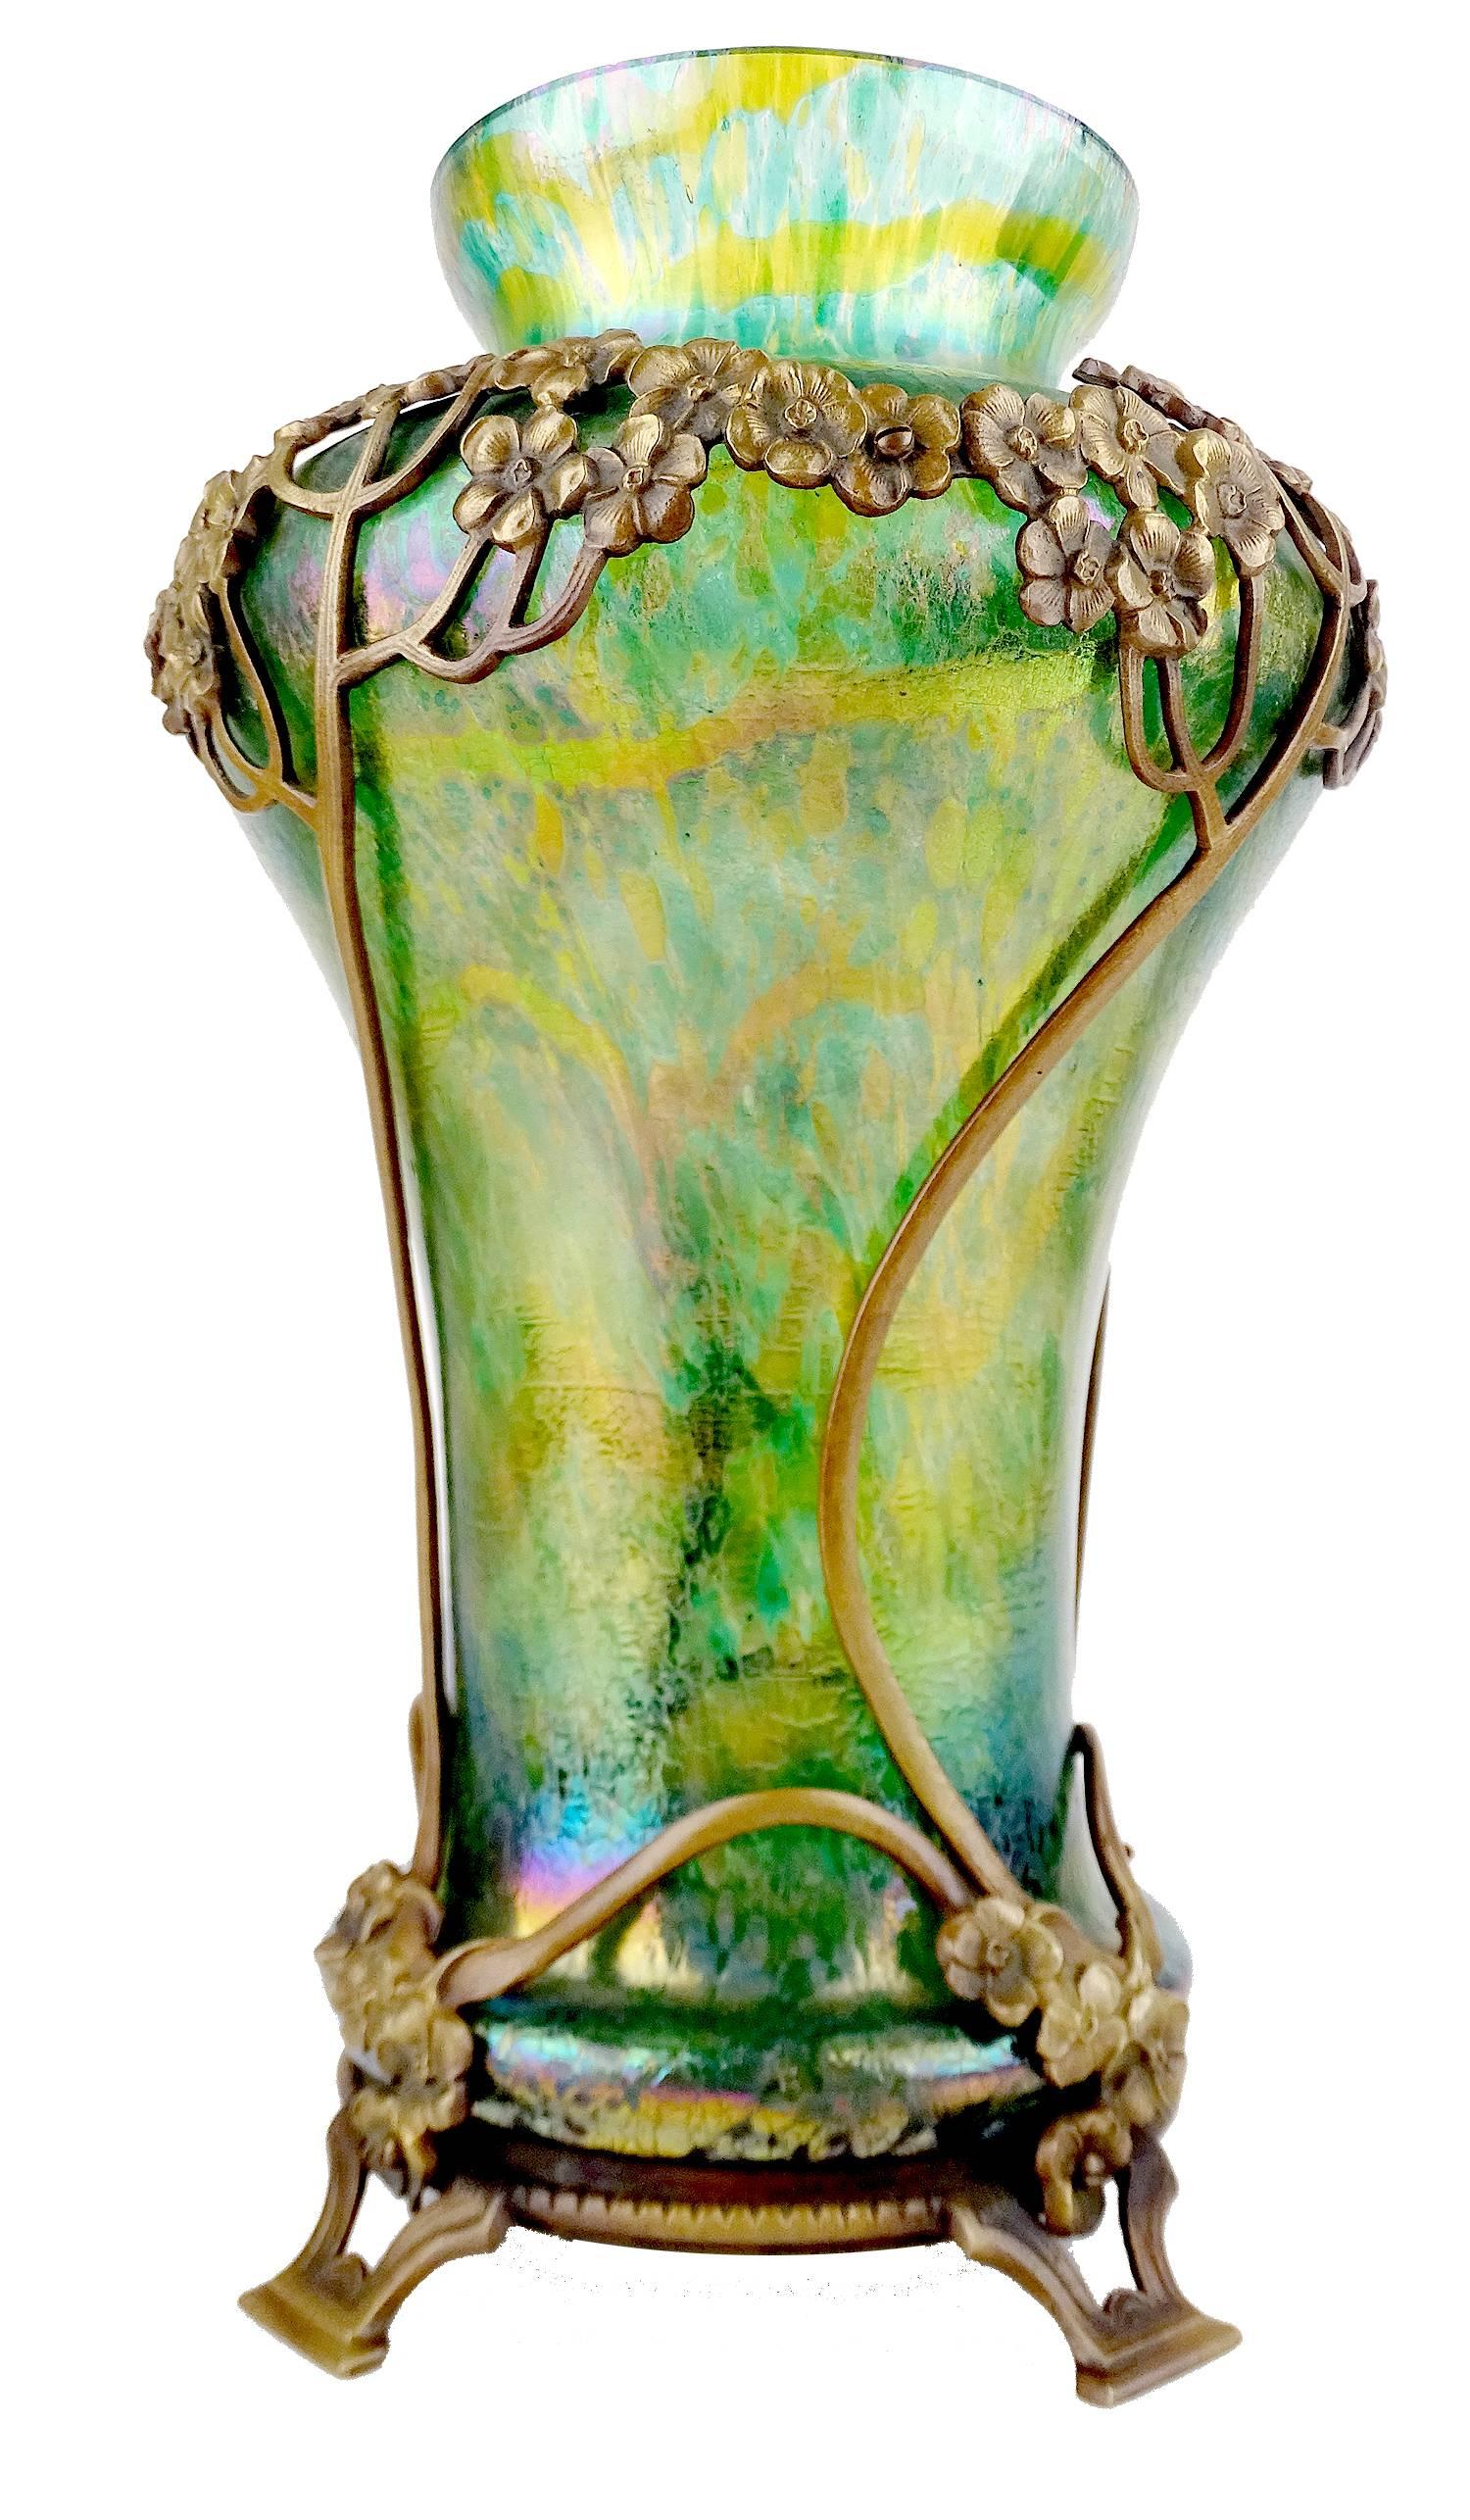 Exceptionnal  Art Nouveau glass vase with bronze overlay by Kralik, circa 1900.
Yellow and turquoise-green iridescent glass, with purple reflects. Embedded into a bronze setting decorated with hydrangea flowers.

Known also in Europe as Jugendstil